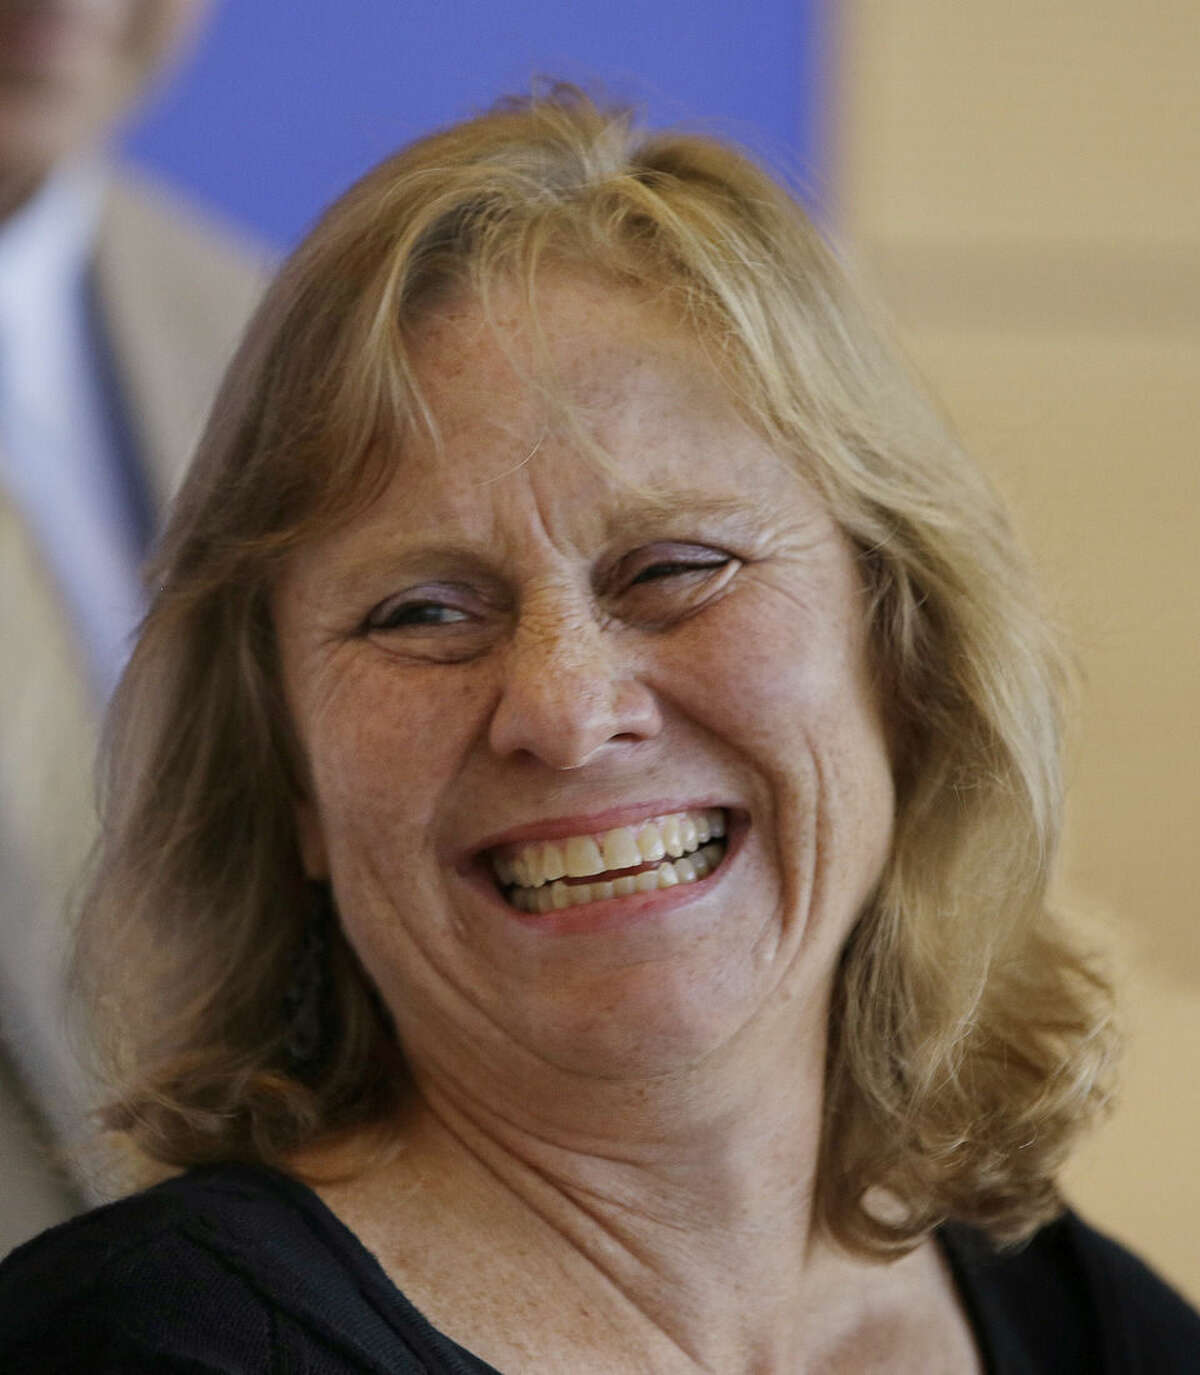 Debbie Sacra, wife of Dr. Rick Sacra, an American doctor who contracted the Ebola virus in Africa, smiles as she announces she spoke to the doctor who put her husband on a plane in Africa bound for the United States during a news conference at the University of Massachusetts Medical School Thursday Sept. 4, 2014 in Worcester, Mass. (AP Photo/Stephan Savoia)